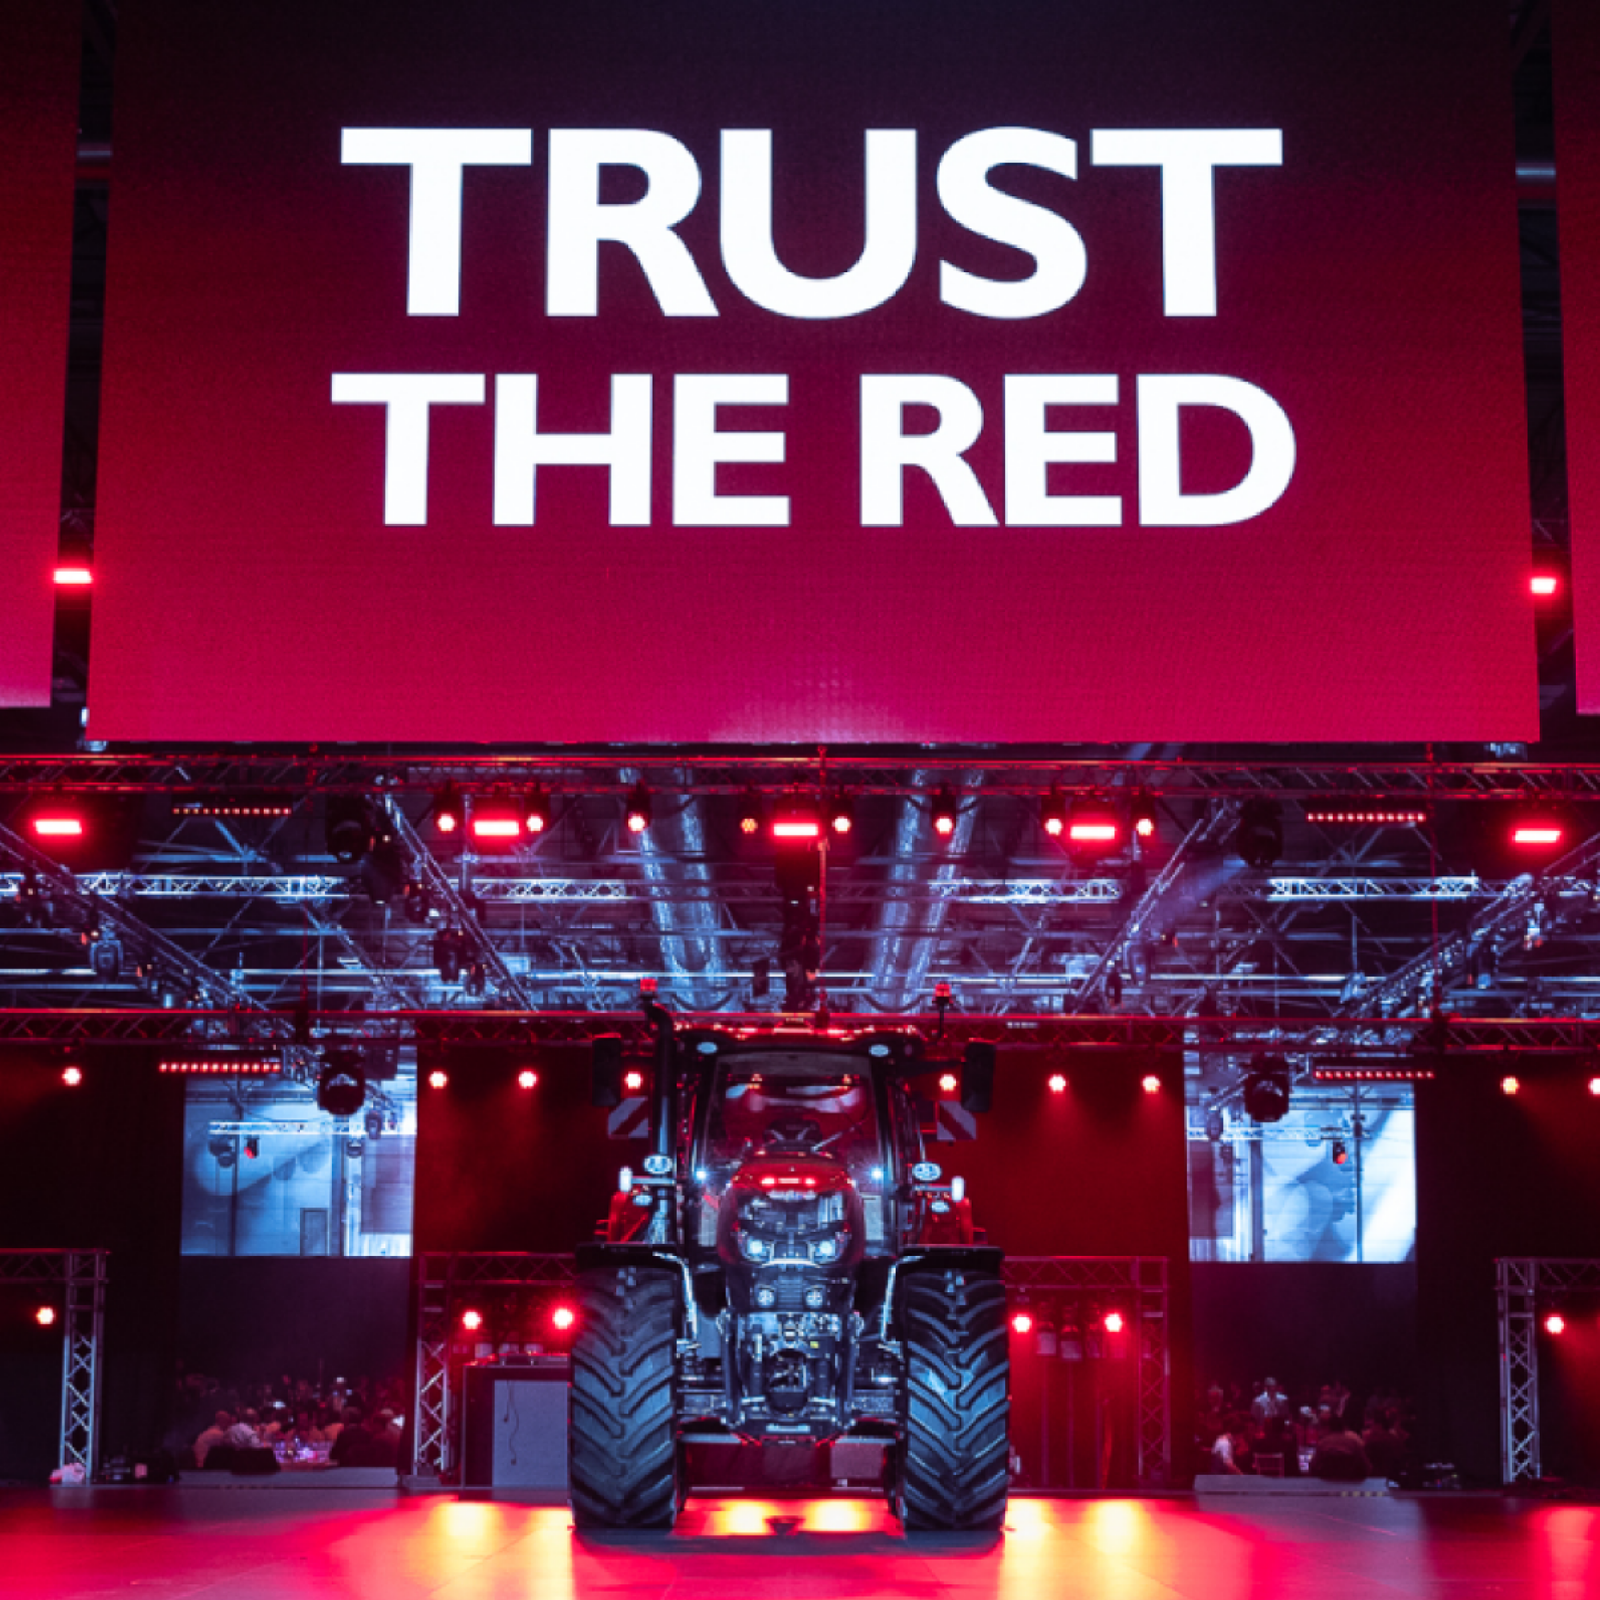 TRUST THE RED